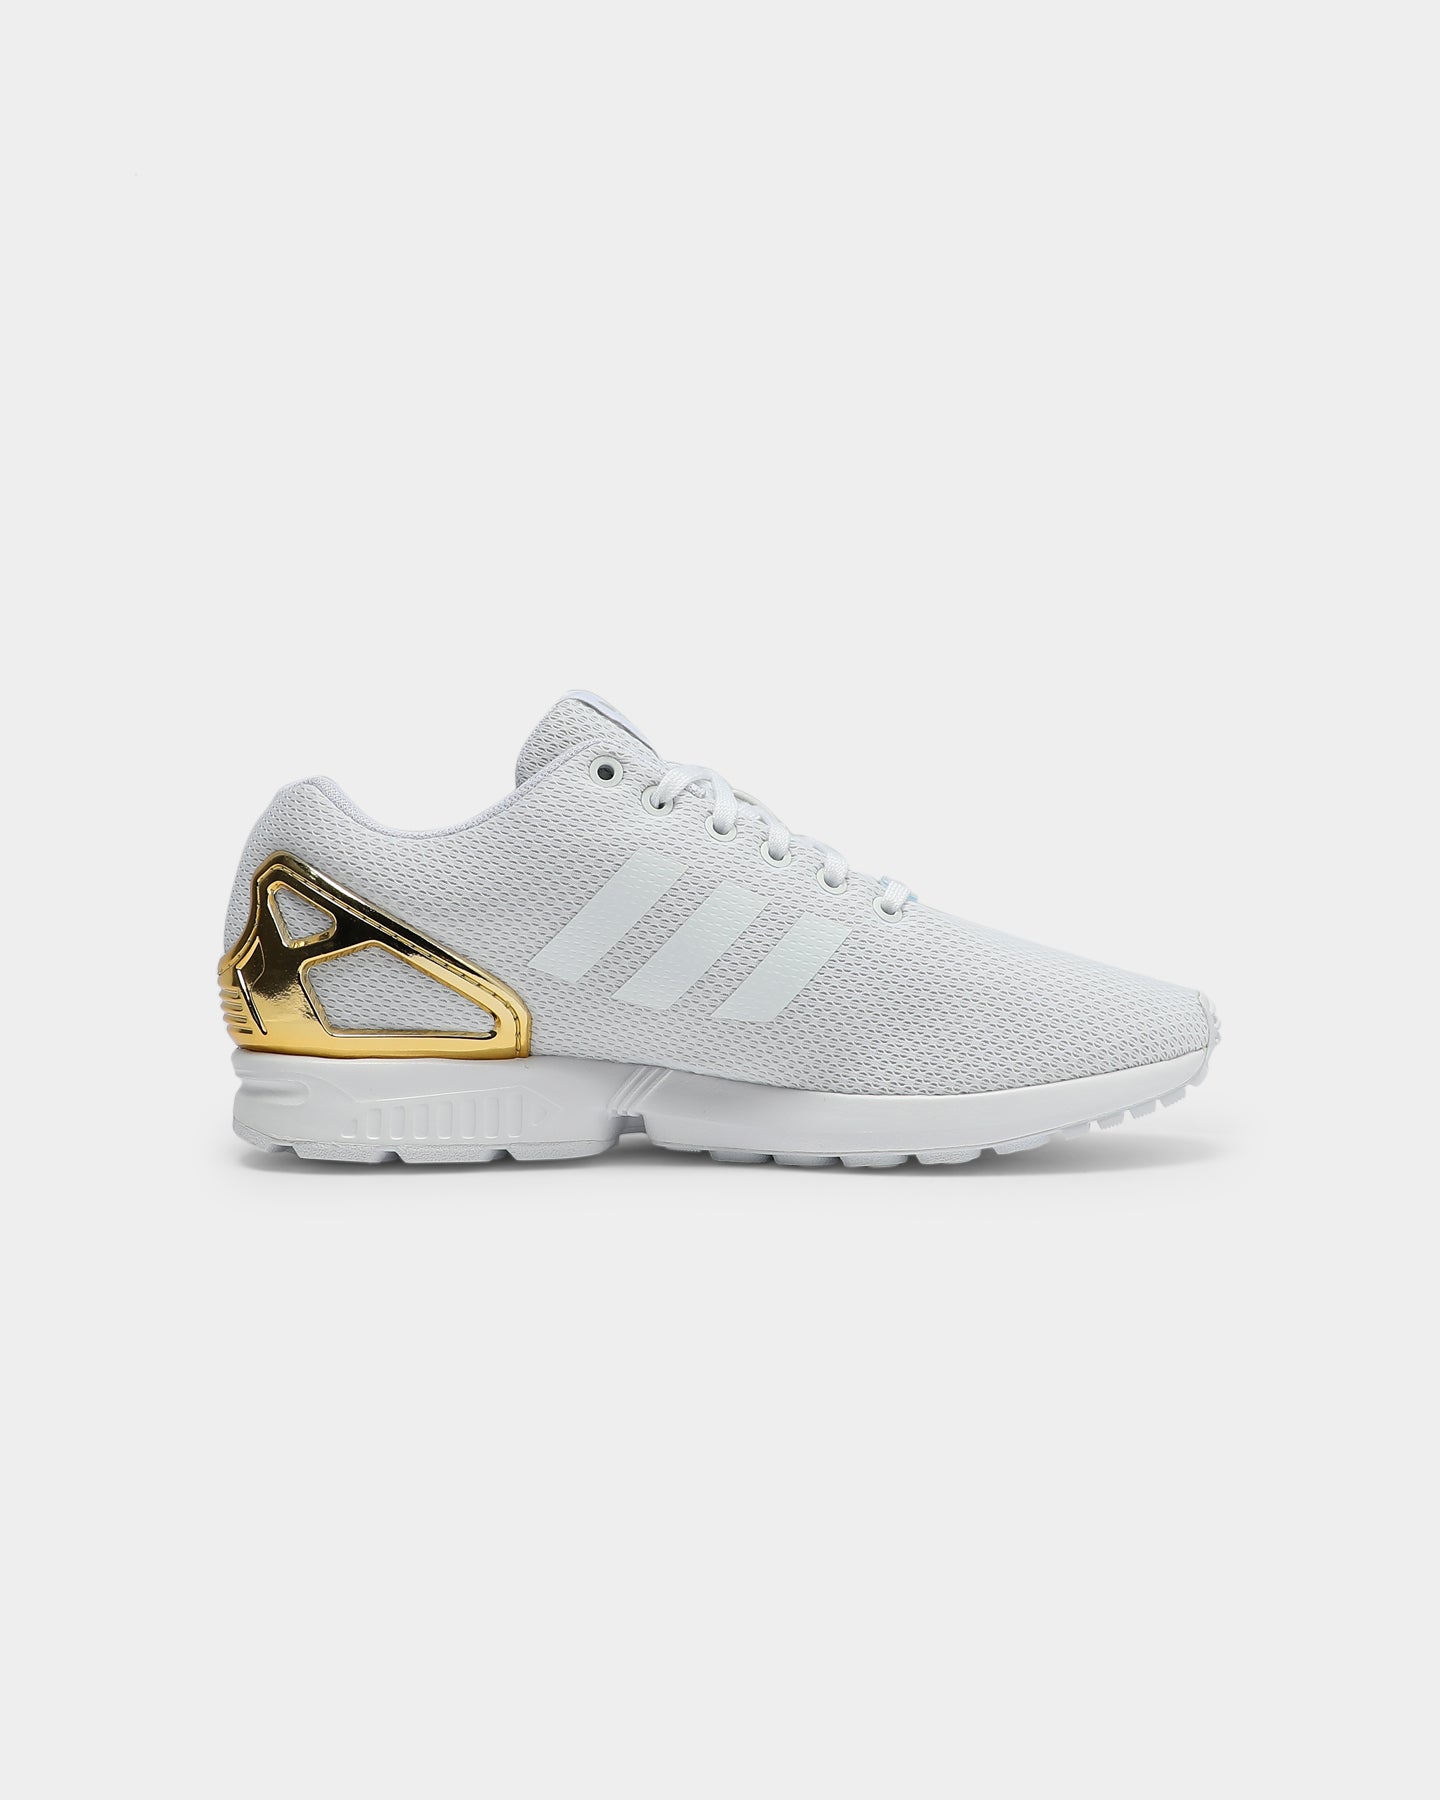 white and gold zx flux adidas